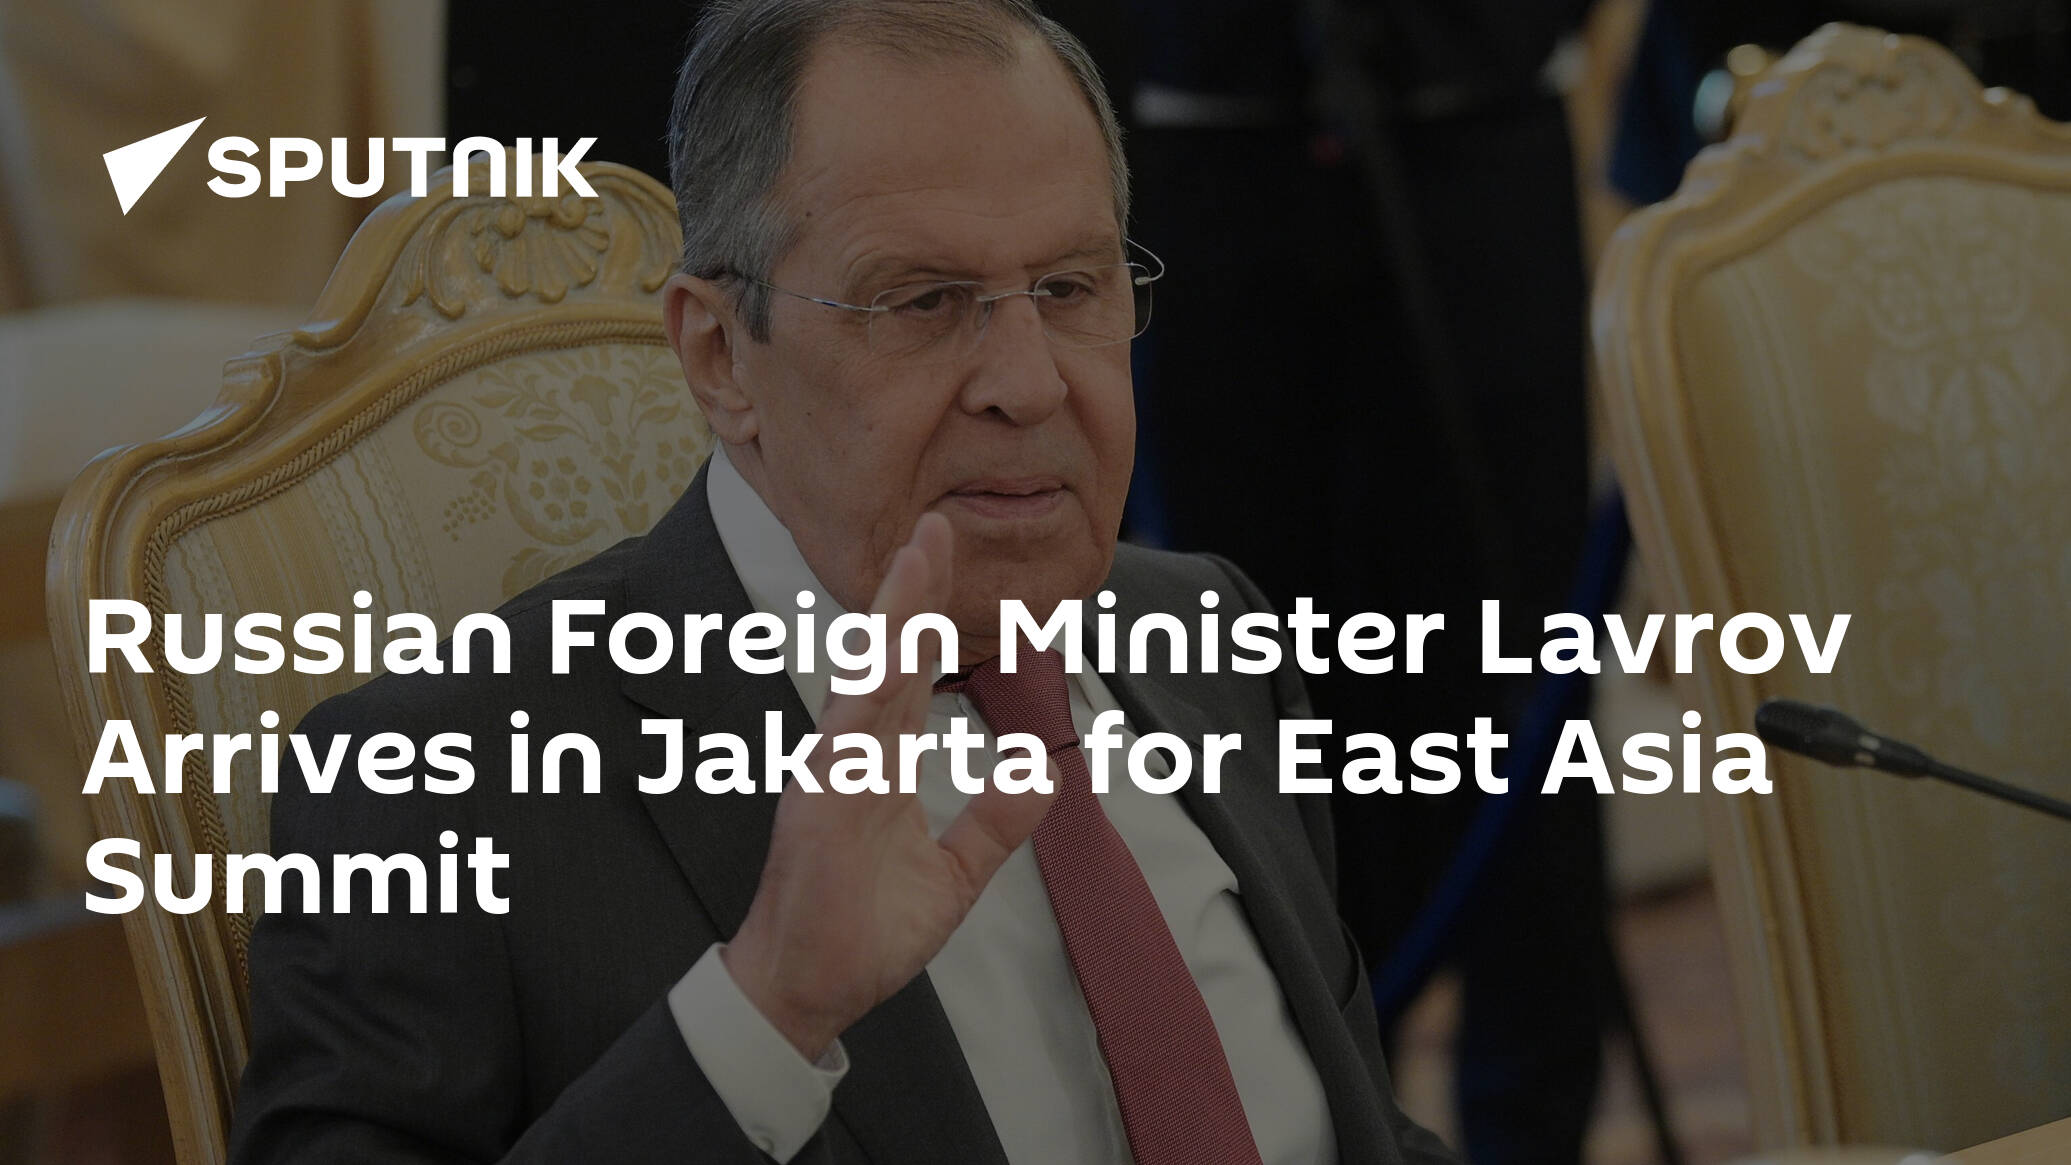 Russian Foreign Minister Lavrov Arrives in Jakarta for East Asia Summit